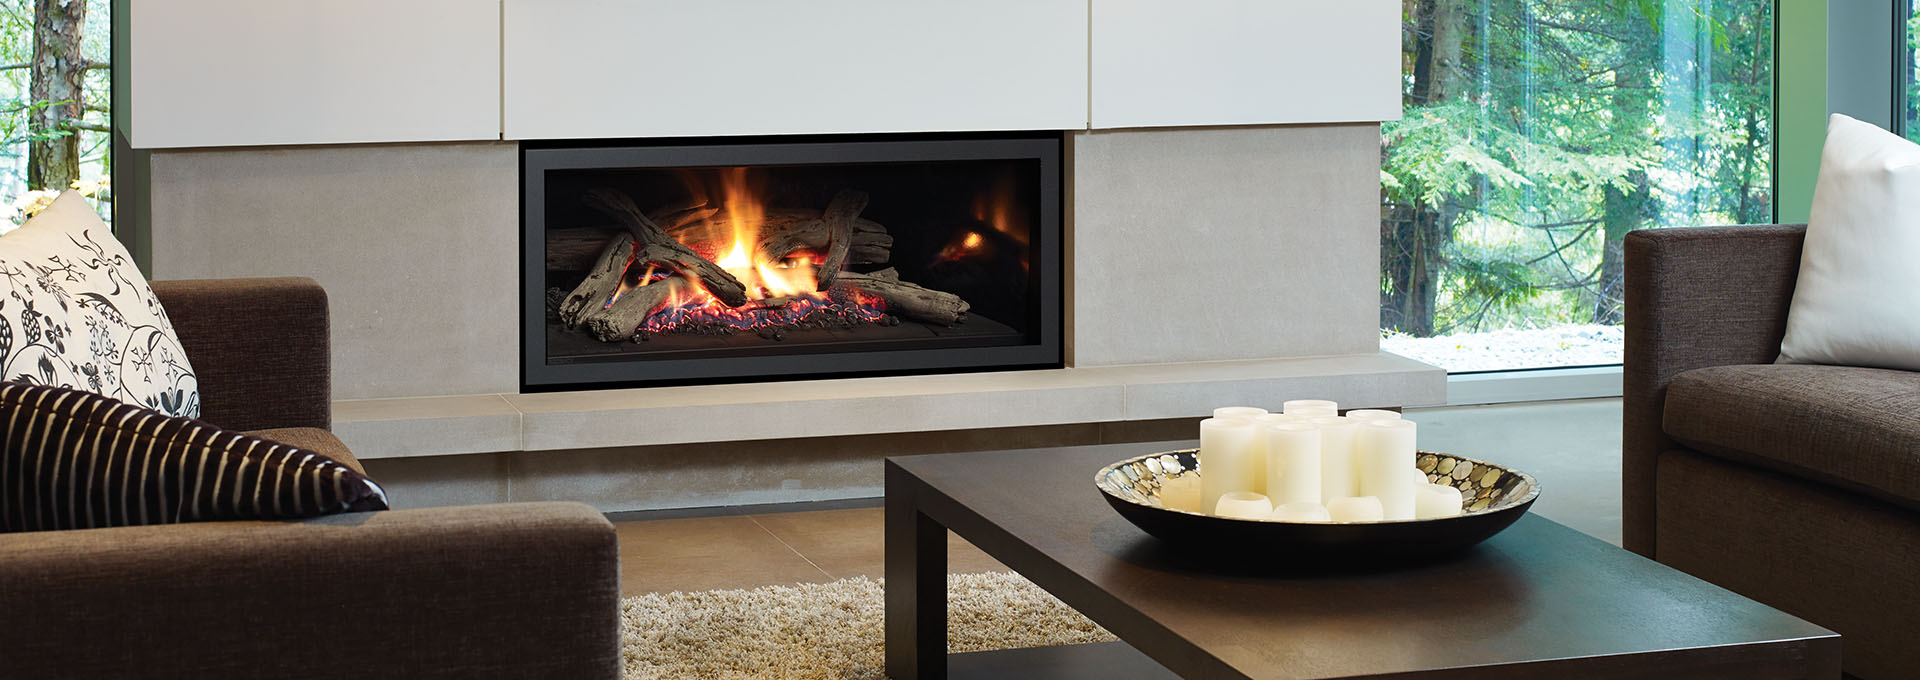 Contemporary Gas Fireplaces Linear, Double Wide Gas Fireplace Insert